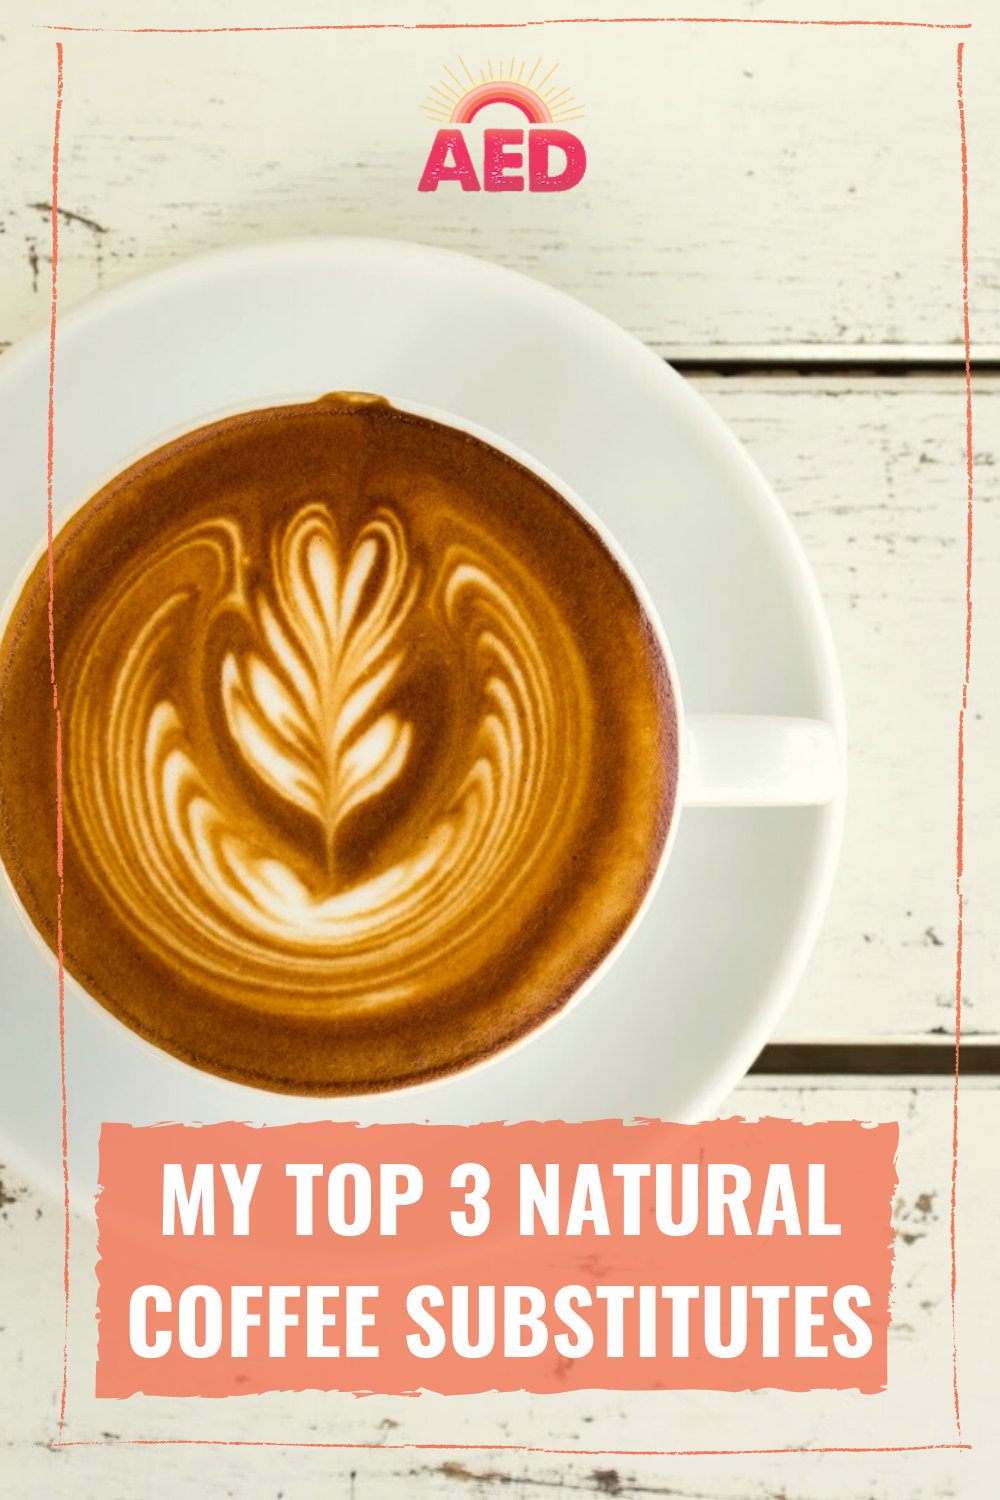 Introducing a blog post about natural coffee substitutes